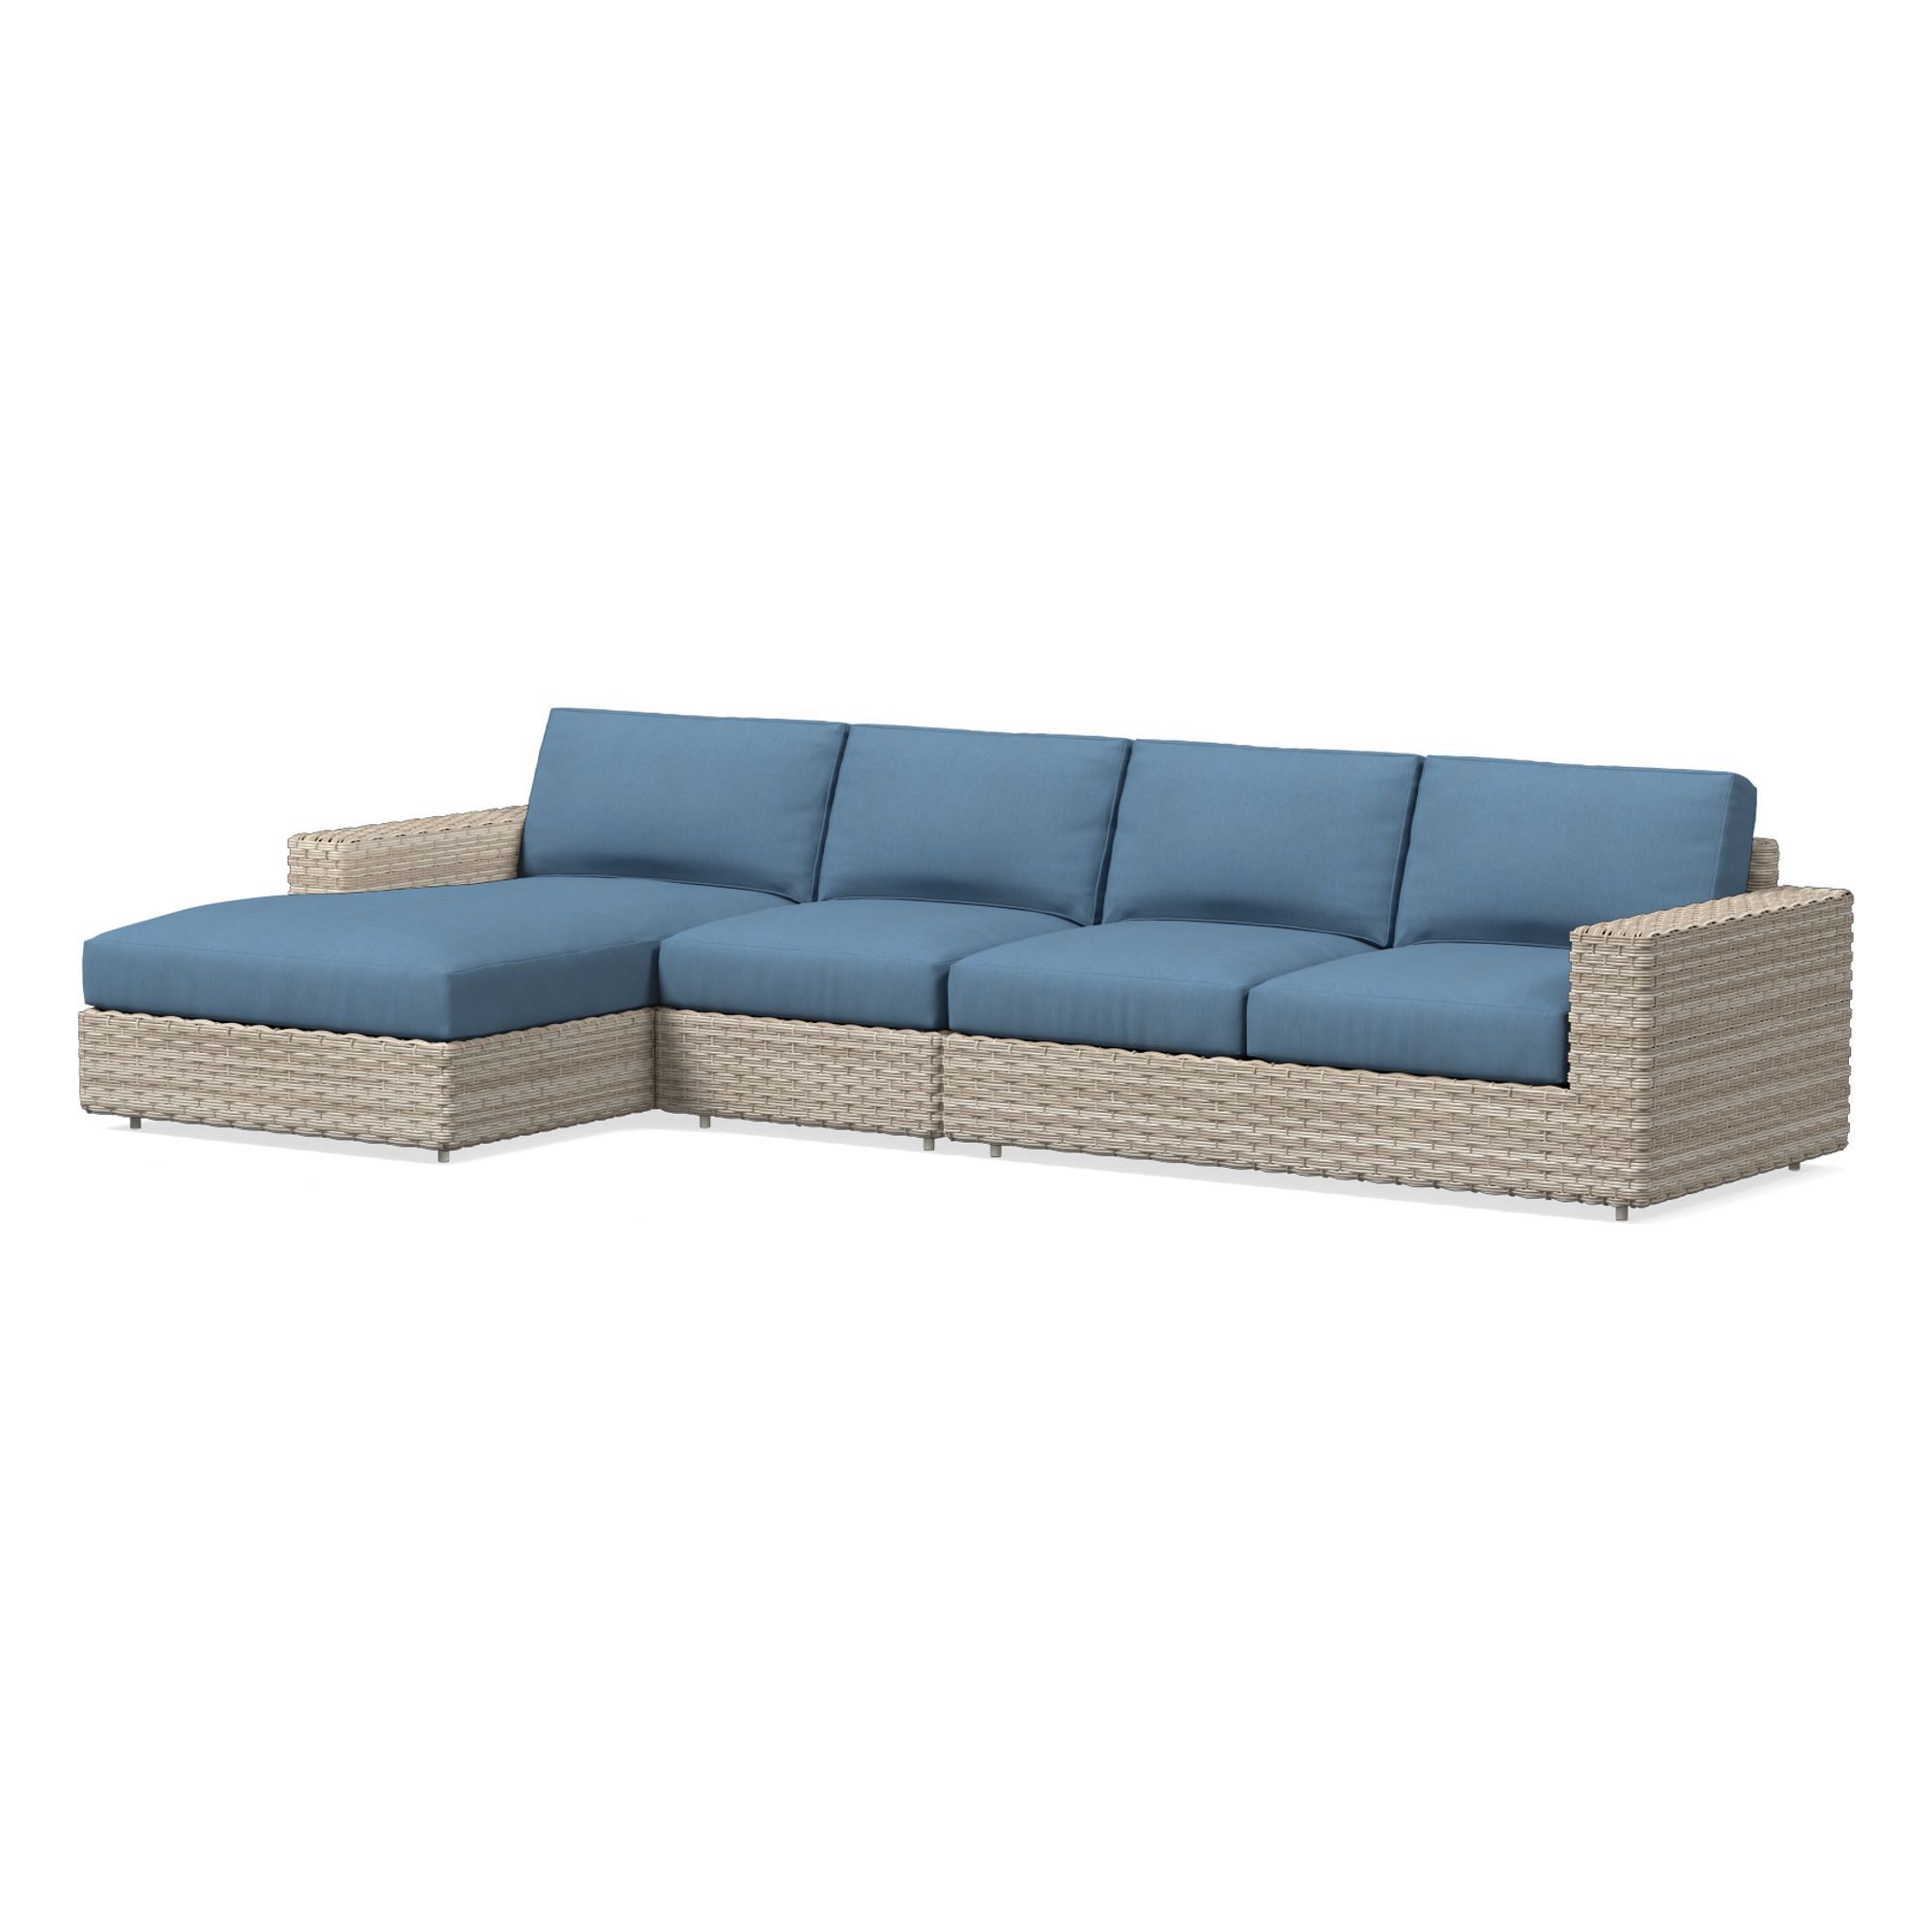 Urban Outdoor 3-Piece Chaise Sectional Cushion Covers | West Elm